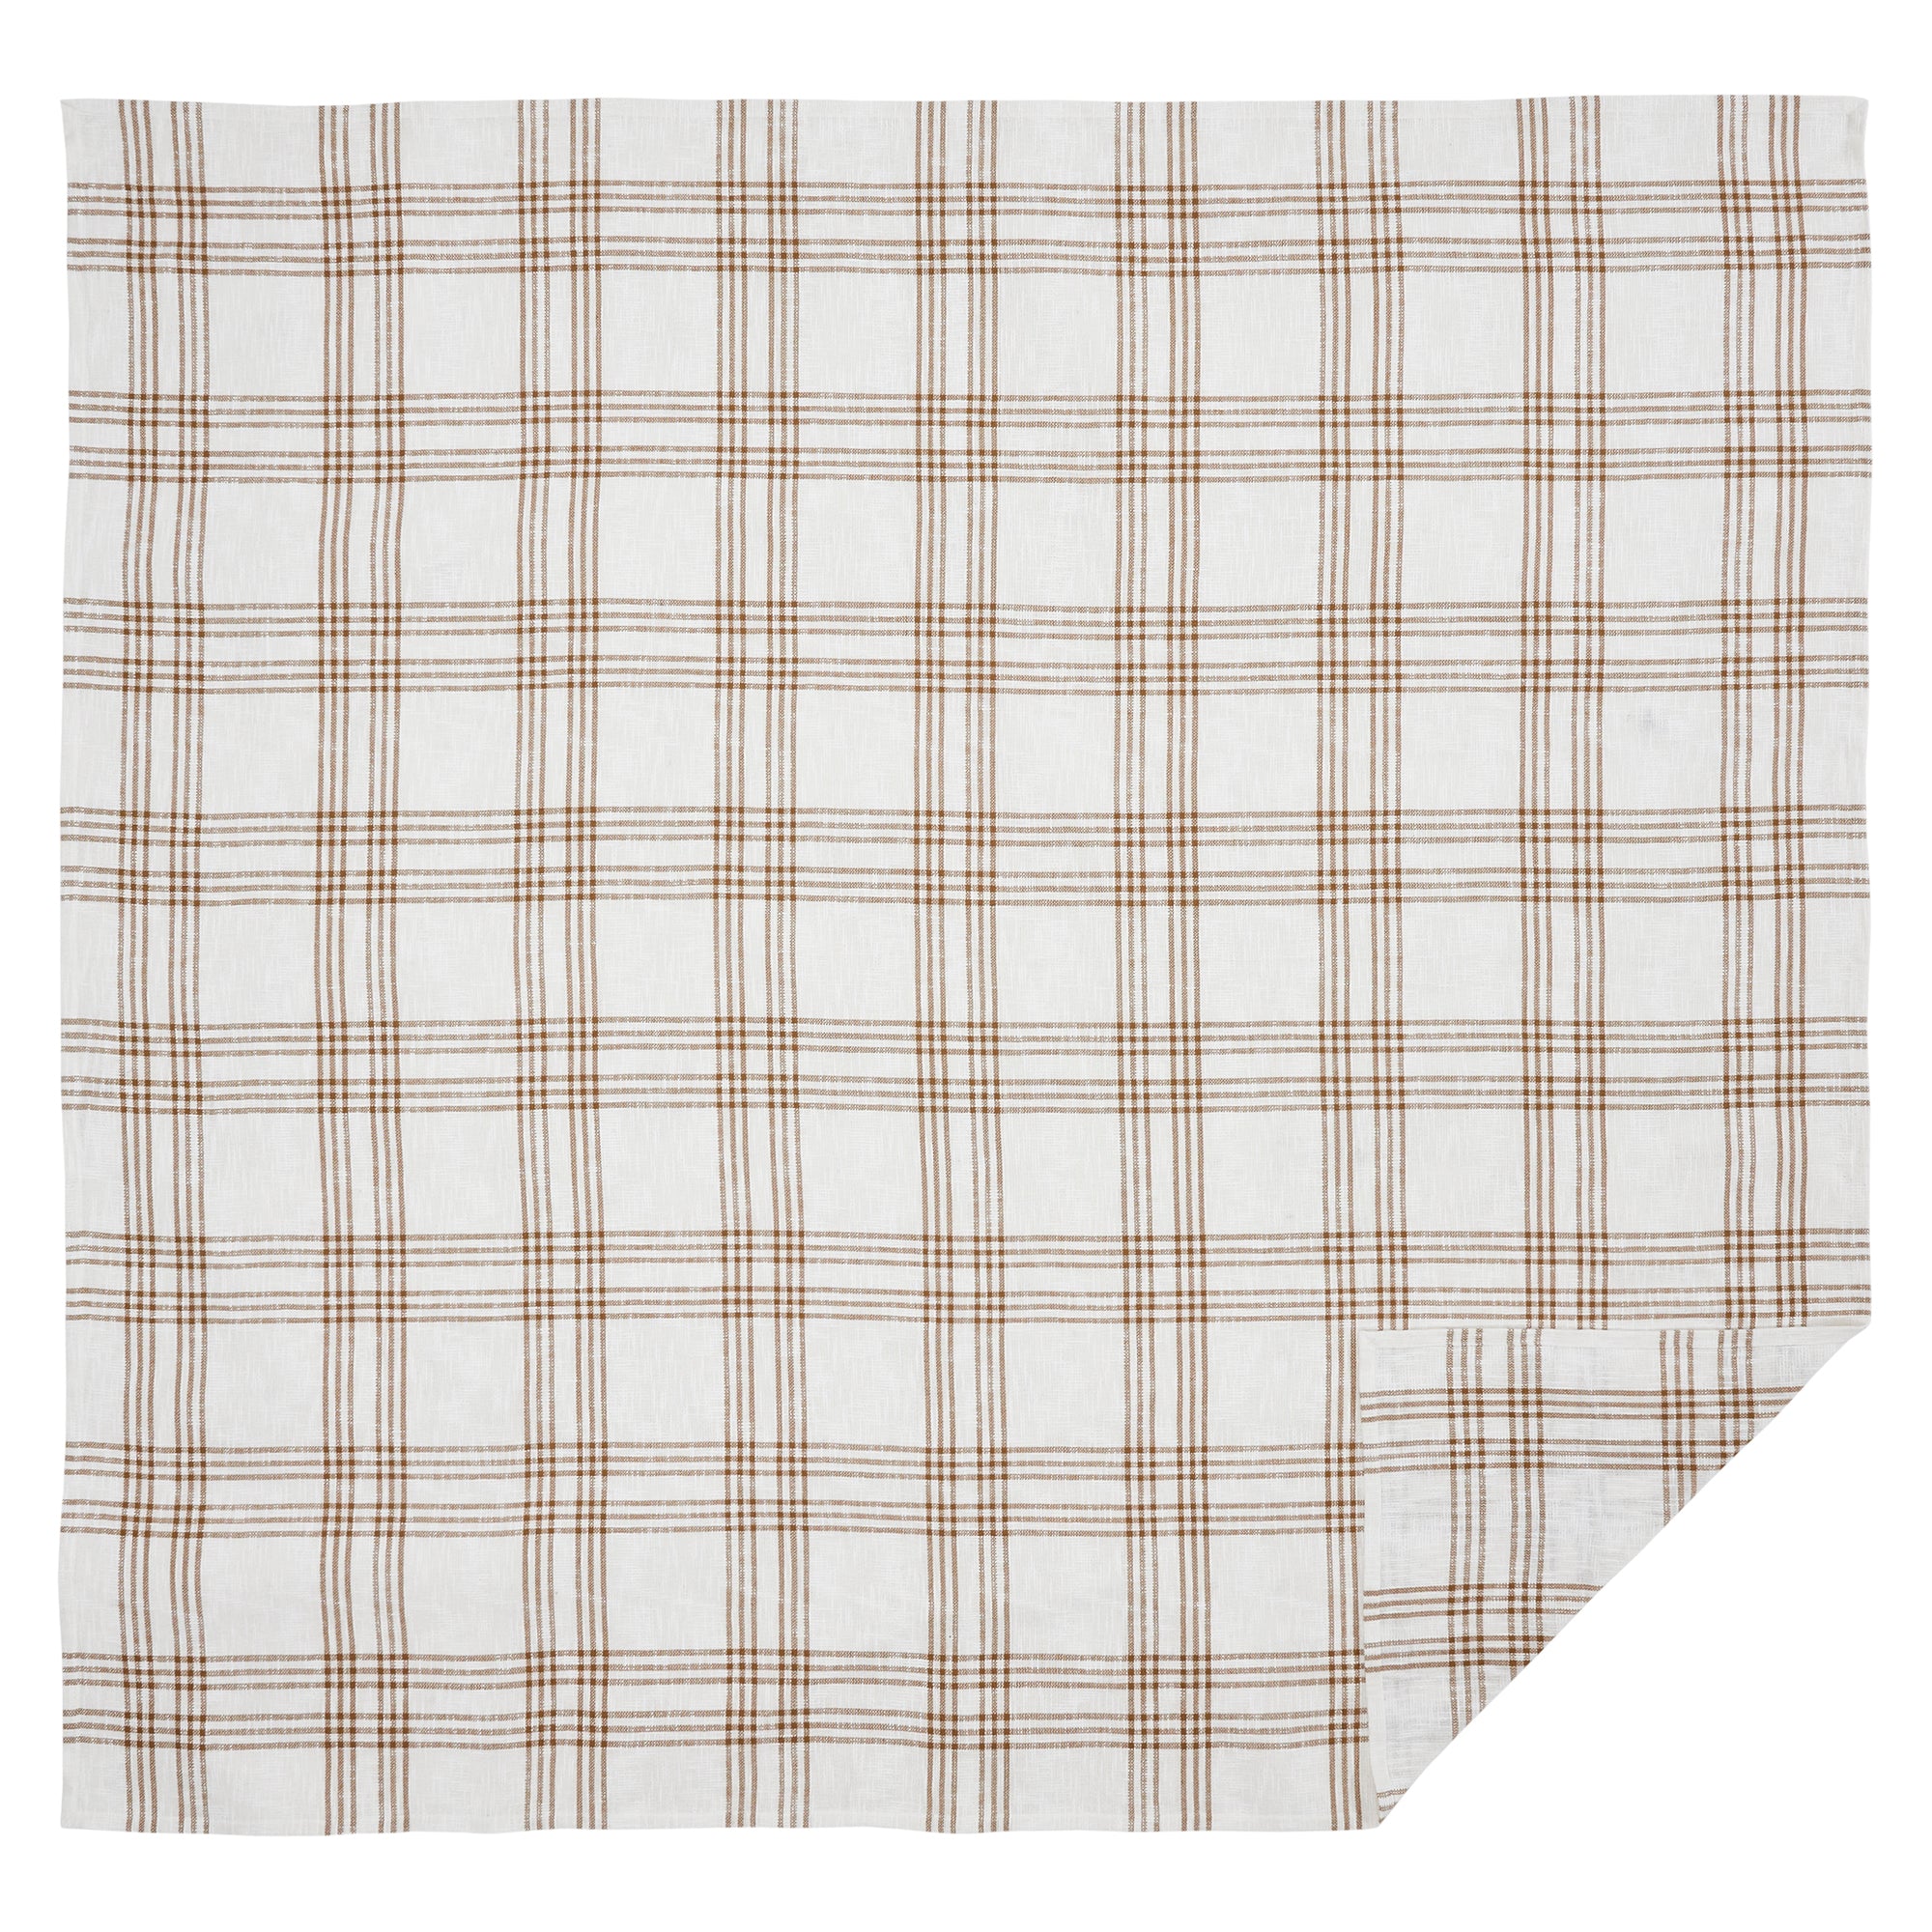 April & Olive Wheat Plaid King Coverlet 97x110 By VHC Brands